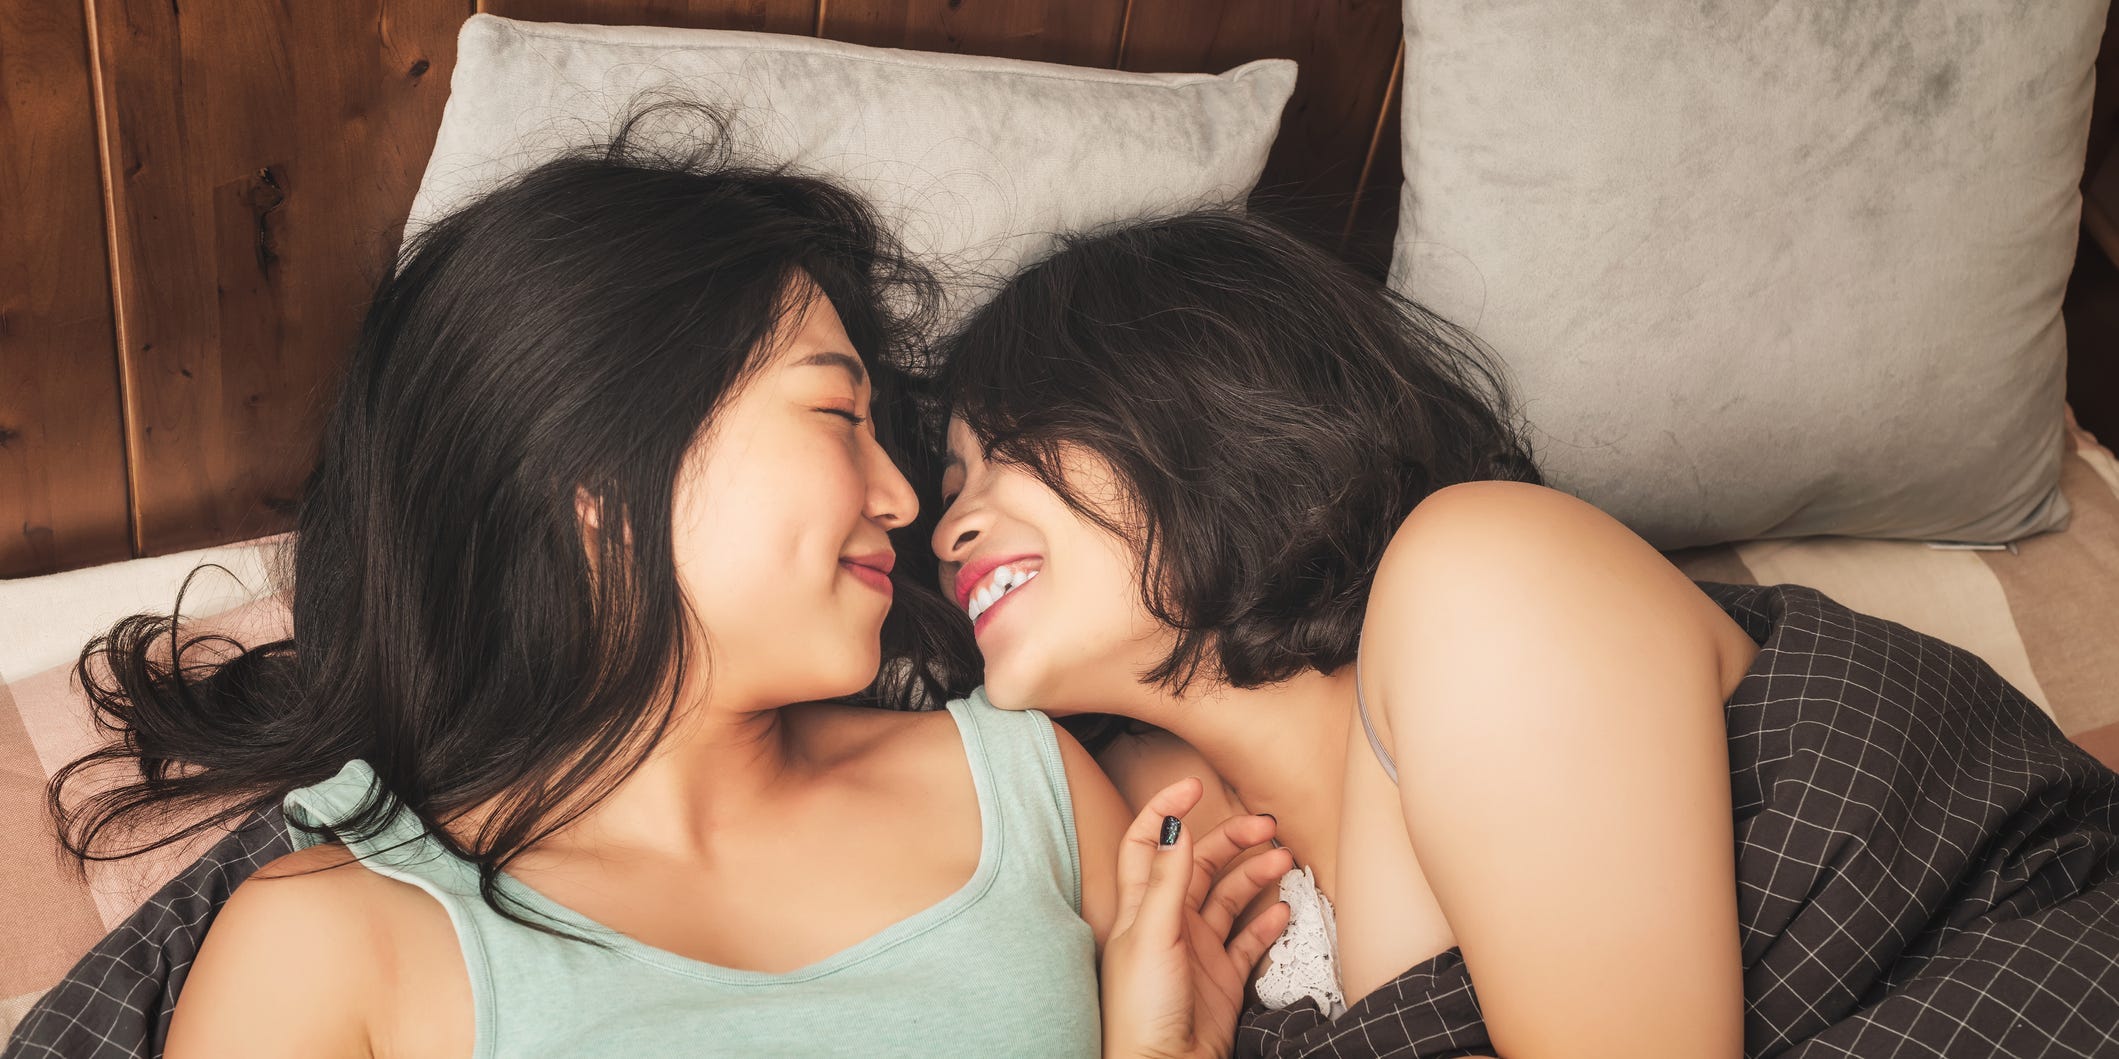 5 steamy sex positions for lesbians, according to a sex therapist